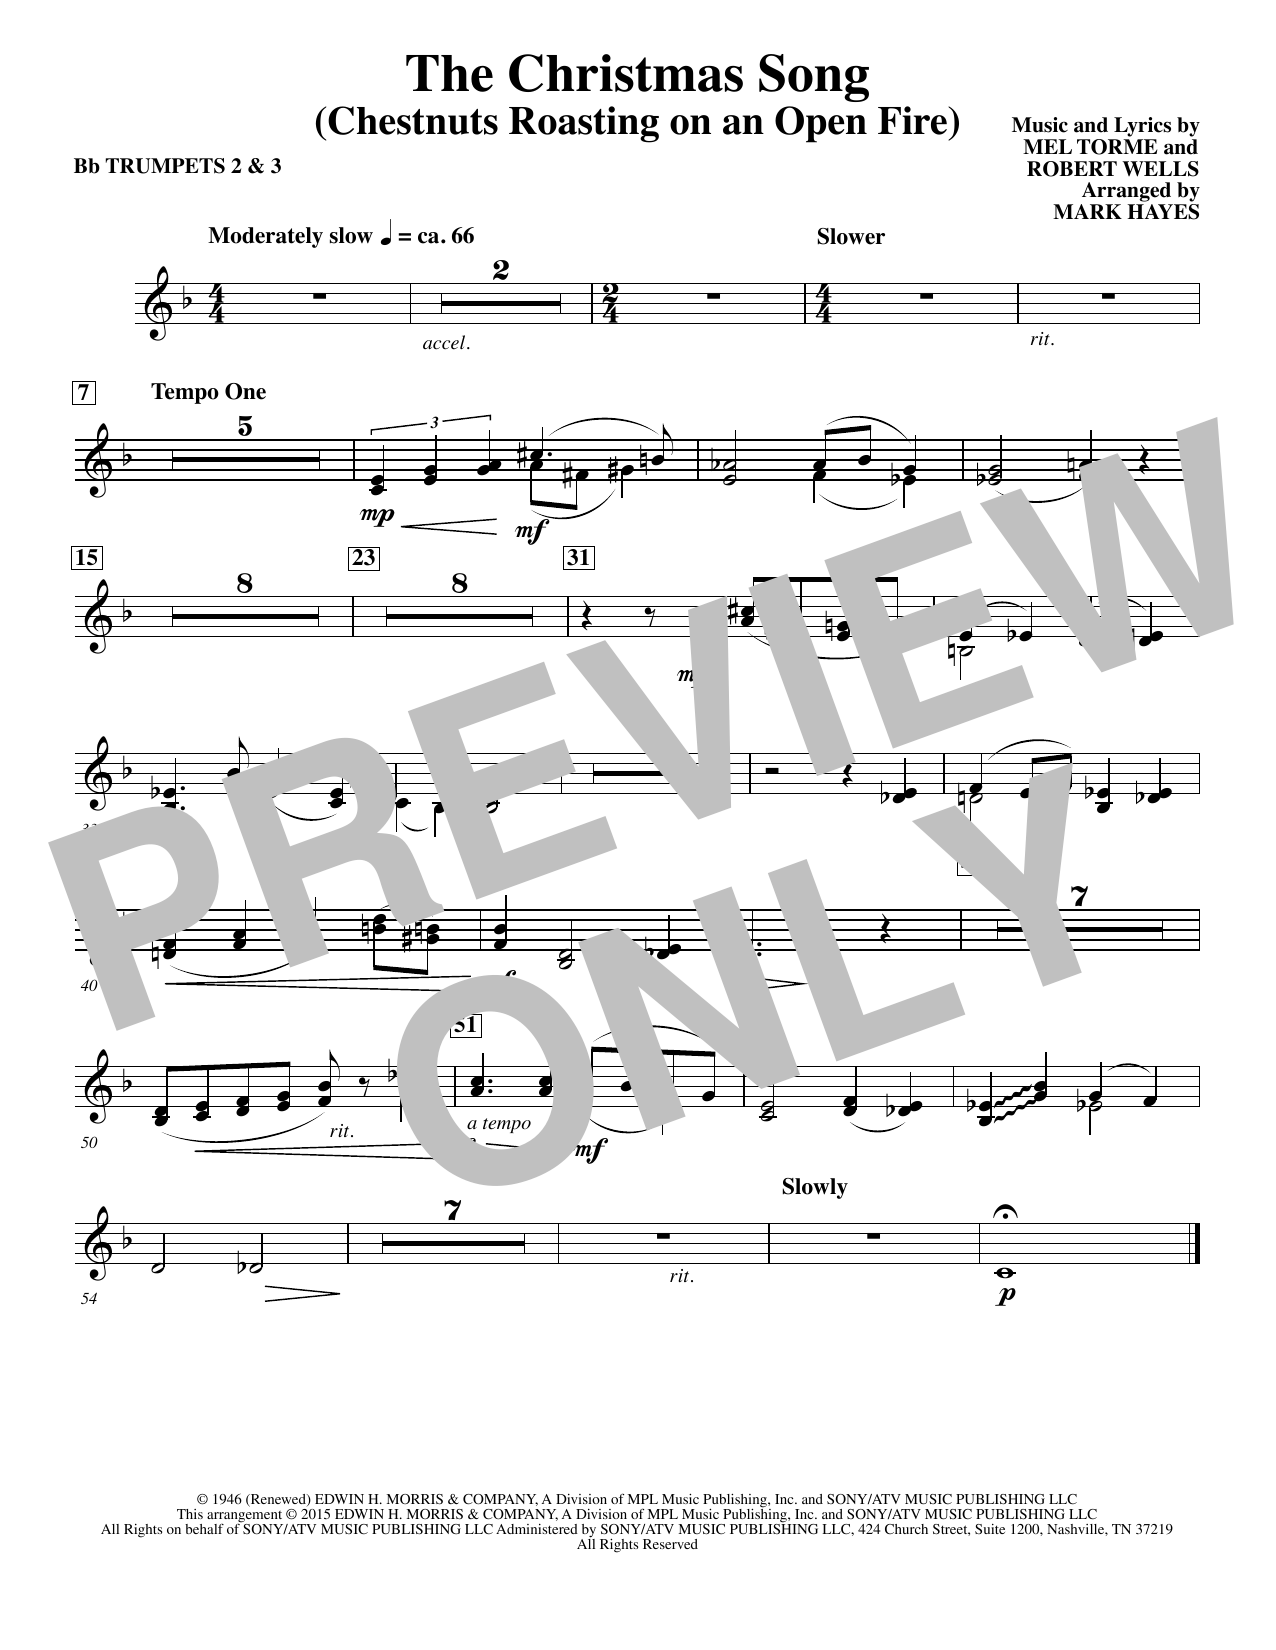 Mel Torme The Christmas Song (Chestnuts Roasting On An Open Fire) - Bb Trumpet 2,3 sheet music notes and chords. Download Printable PDF.